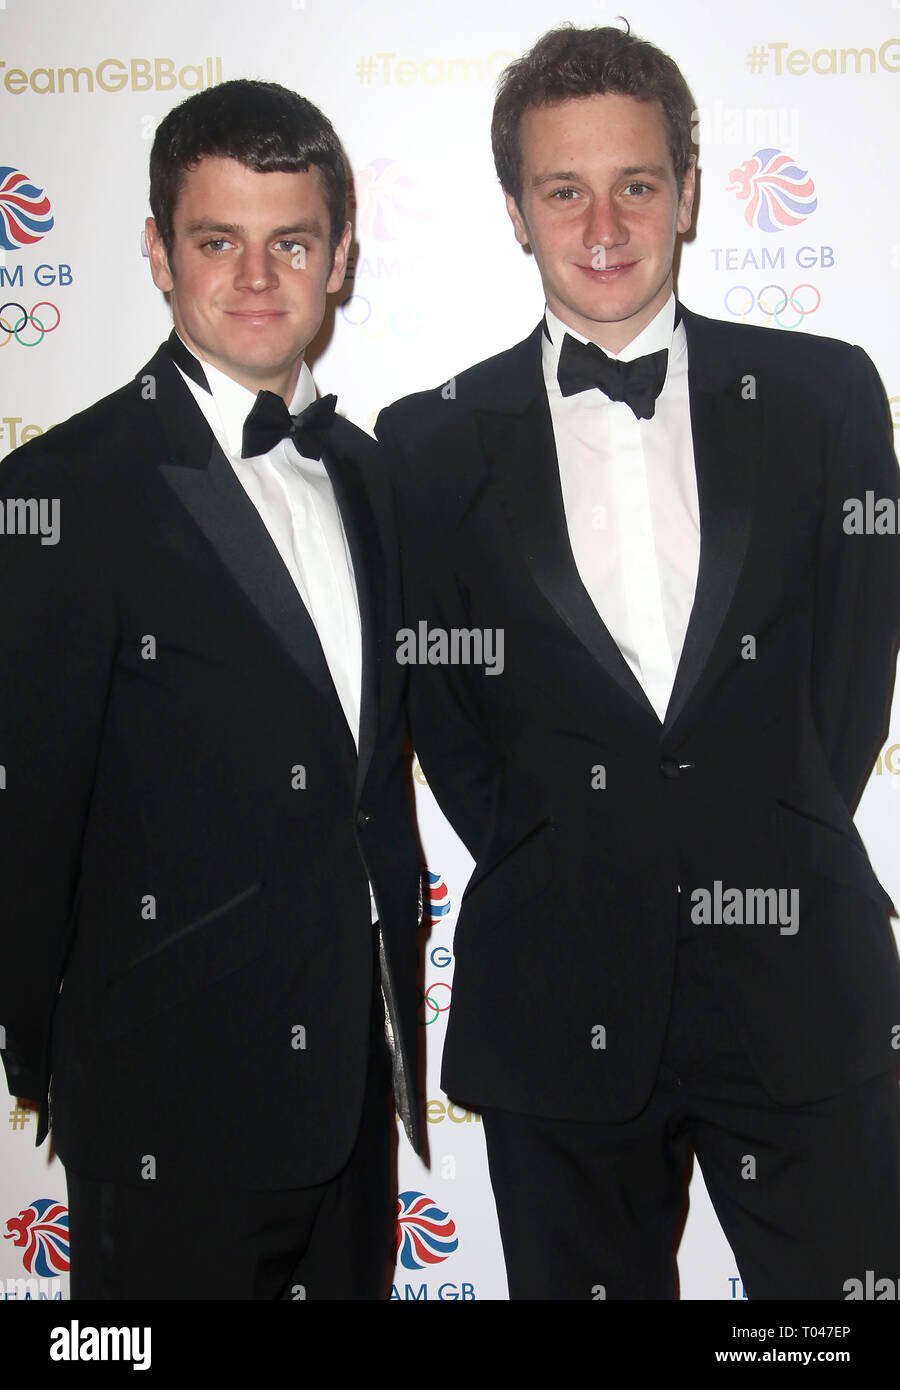 Nov 30, 2016 - London, England, UK - Team GB Ball, Battersea Evolution - Red Carpet Arrivals Photo Shows: Jonathan Brownlee (L) and Alistair Brownlee Stock Photo